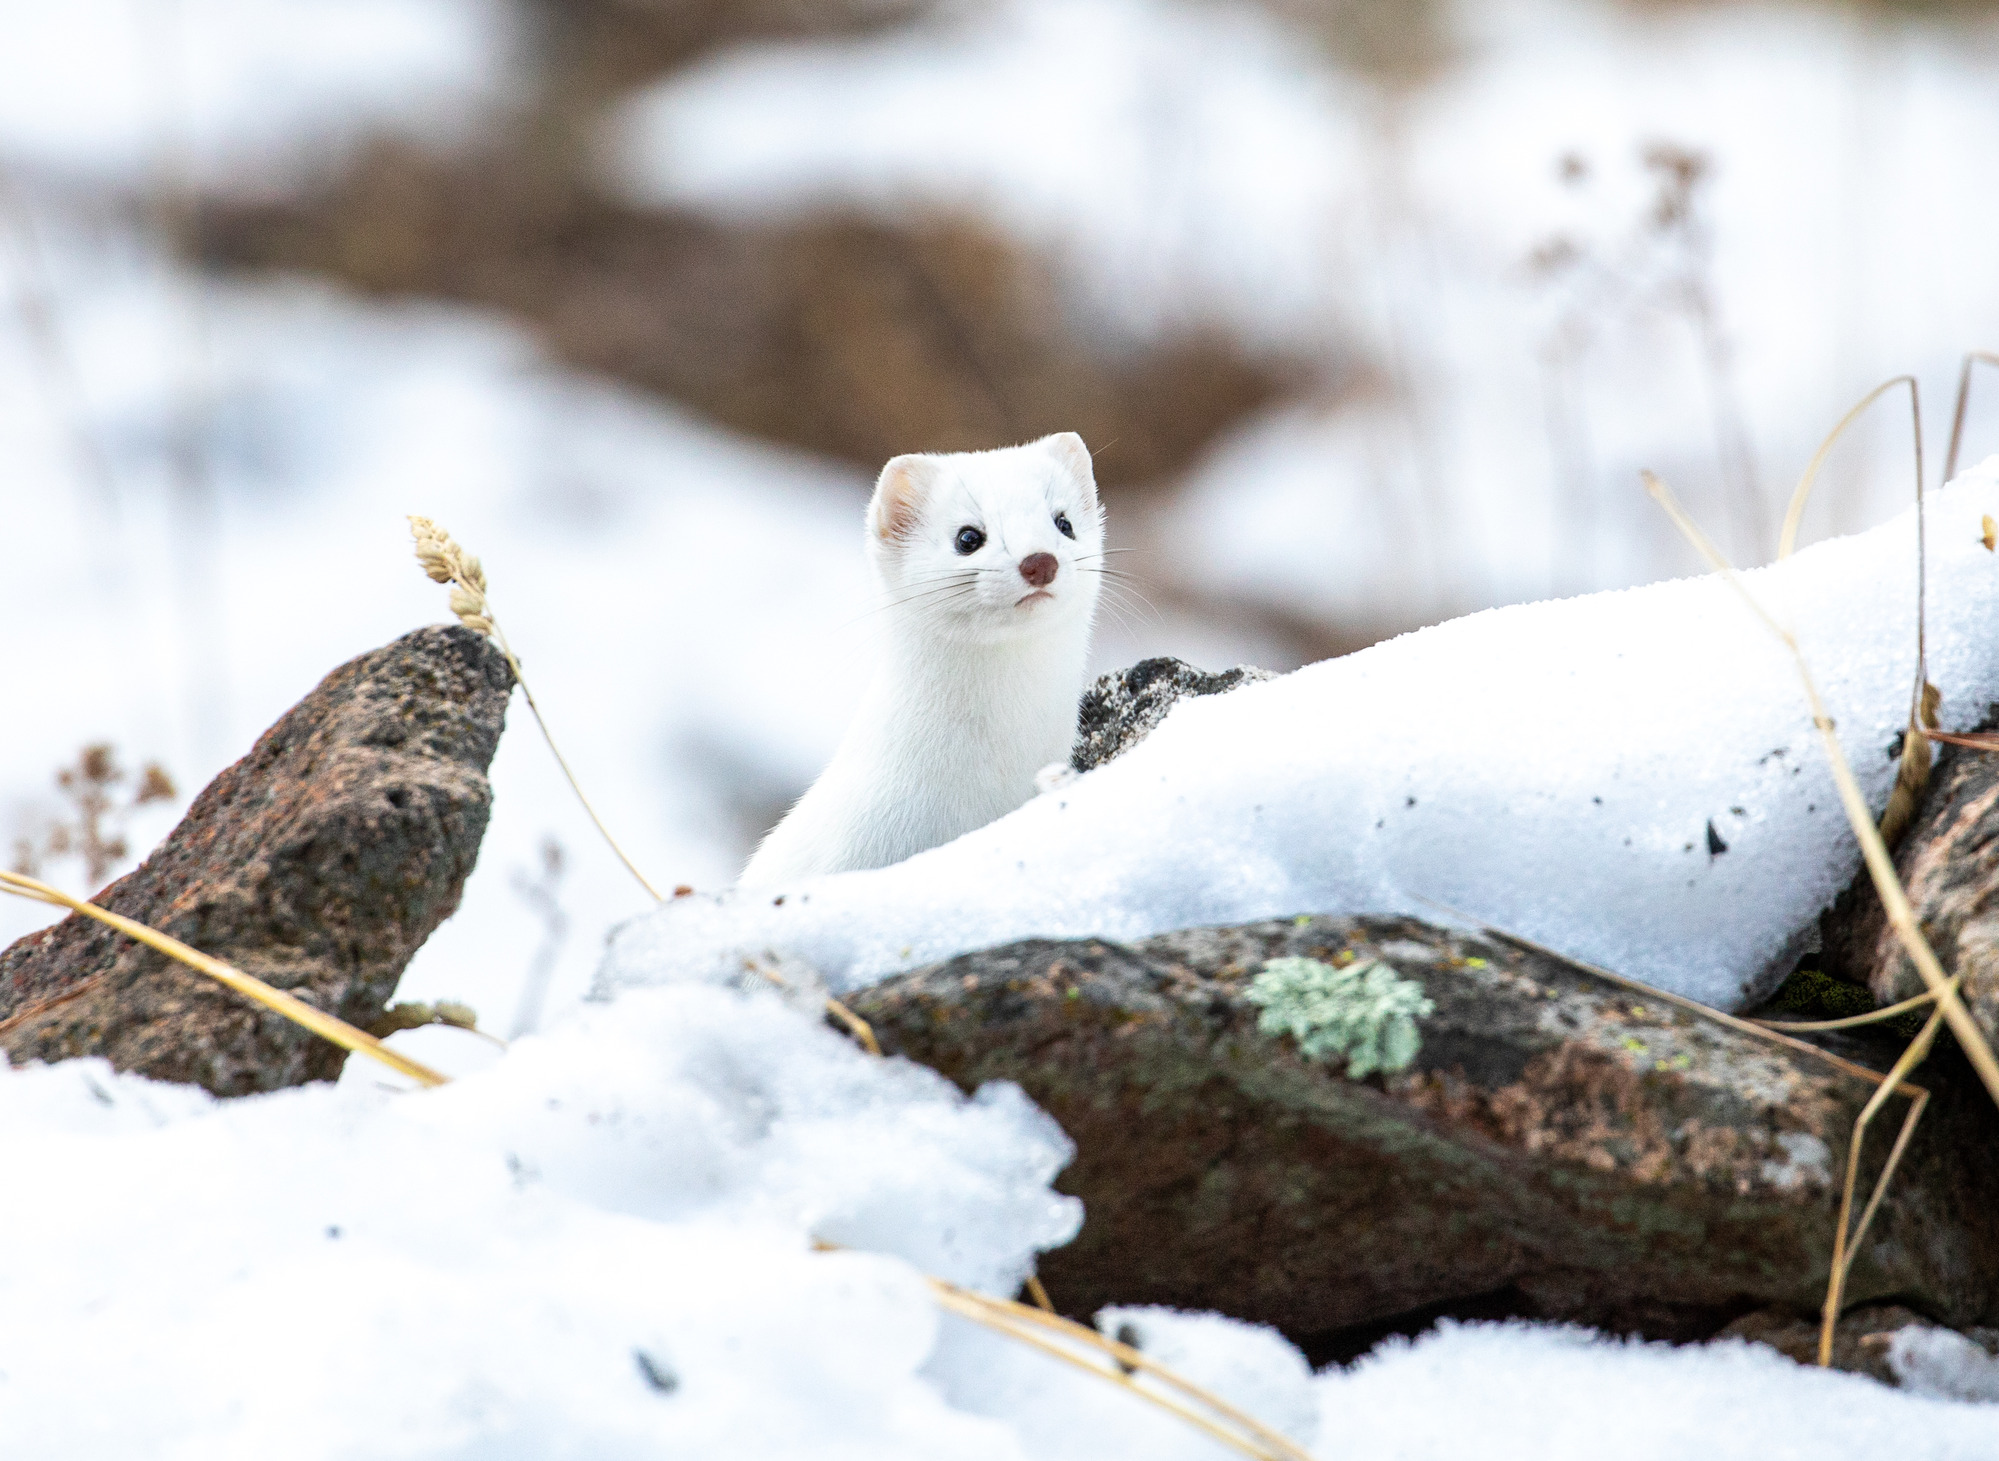 A white weasel looks over some snow on top of a rock.